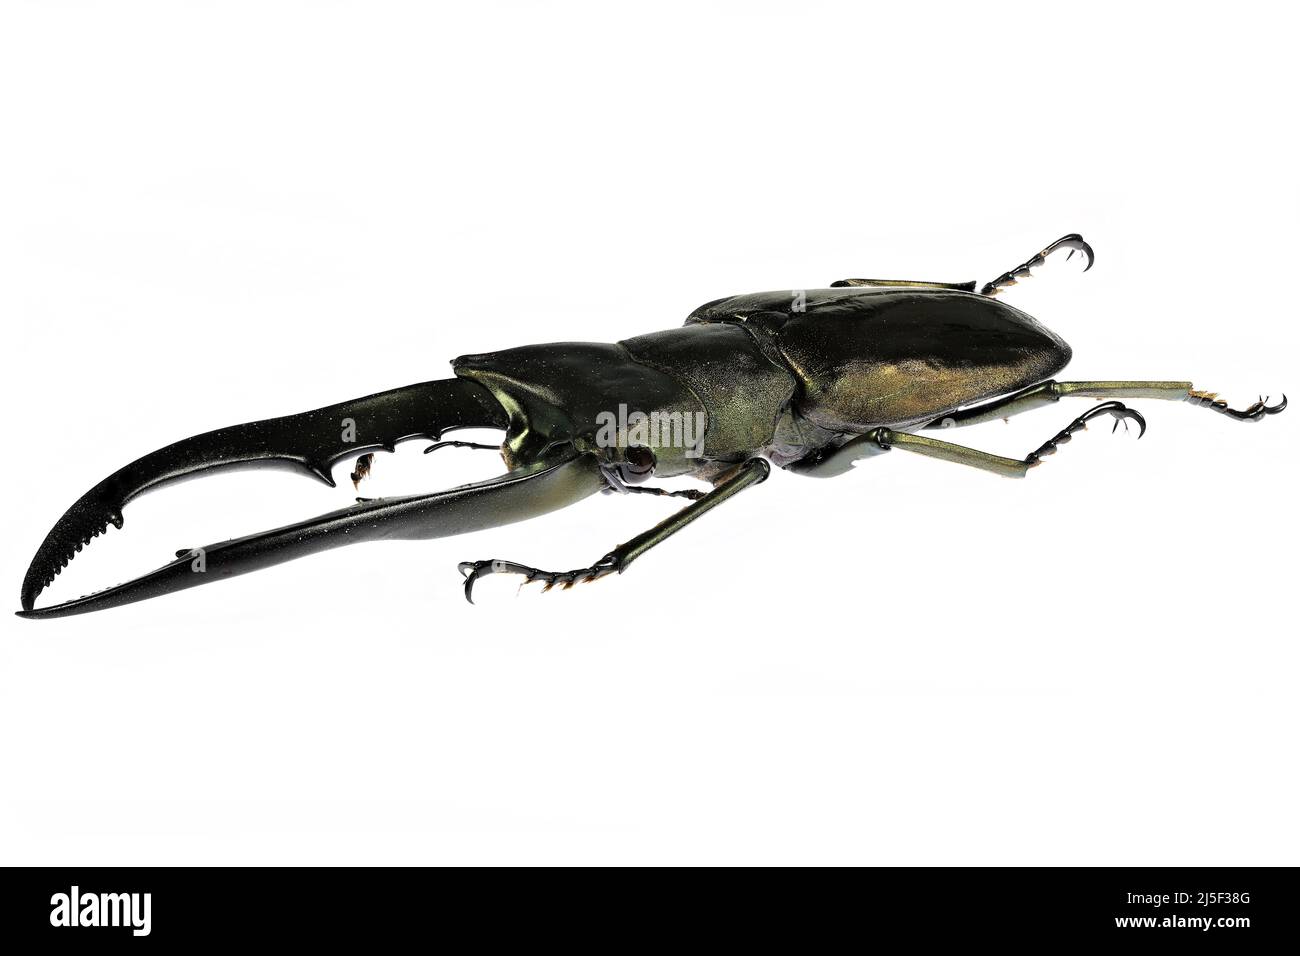 stag beetle (Cyclommatus metallifer finae) isolated on white background Stock Photo